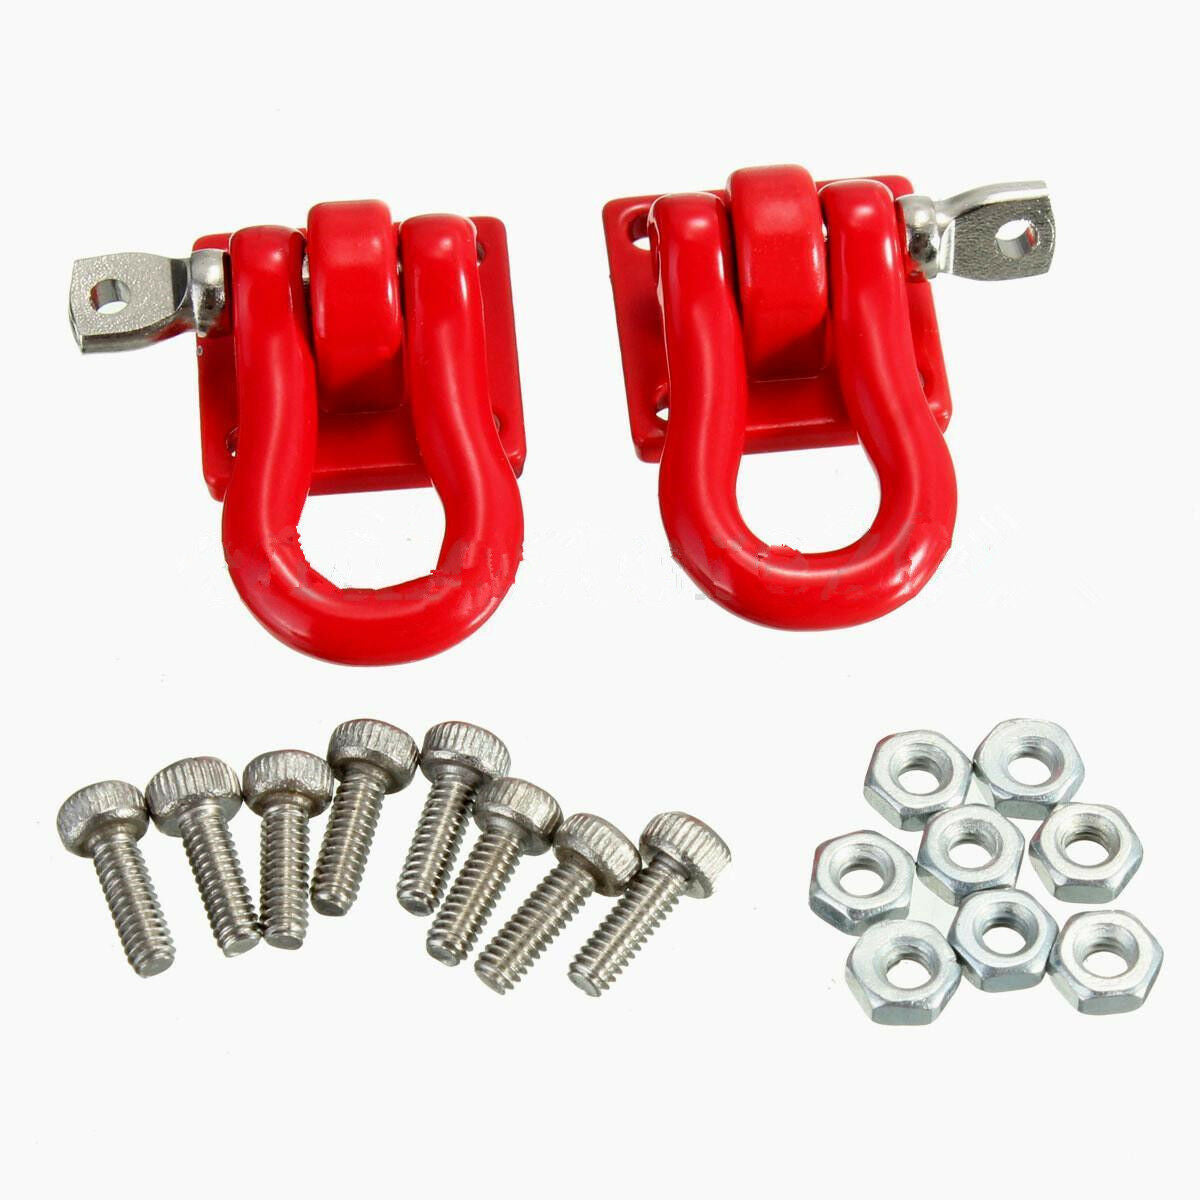 1 Pair 1:10 Scale Hook Shackles for RC SCX-10 Crawler Truck Accessories Red T DD